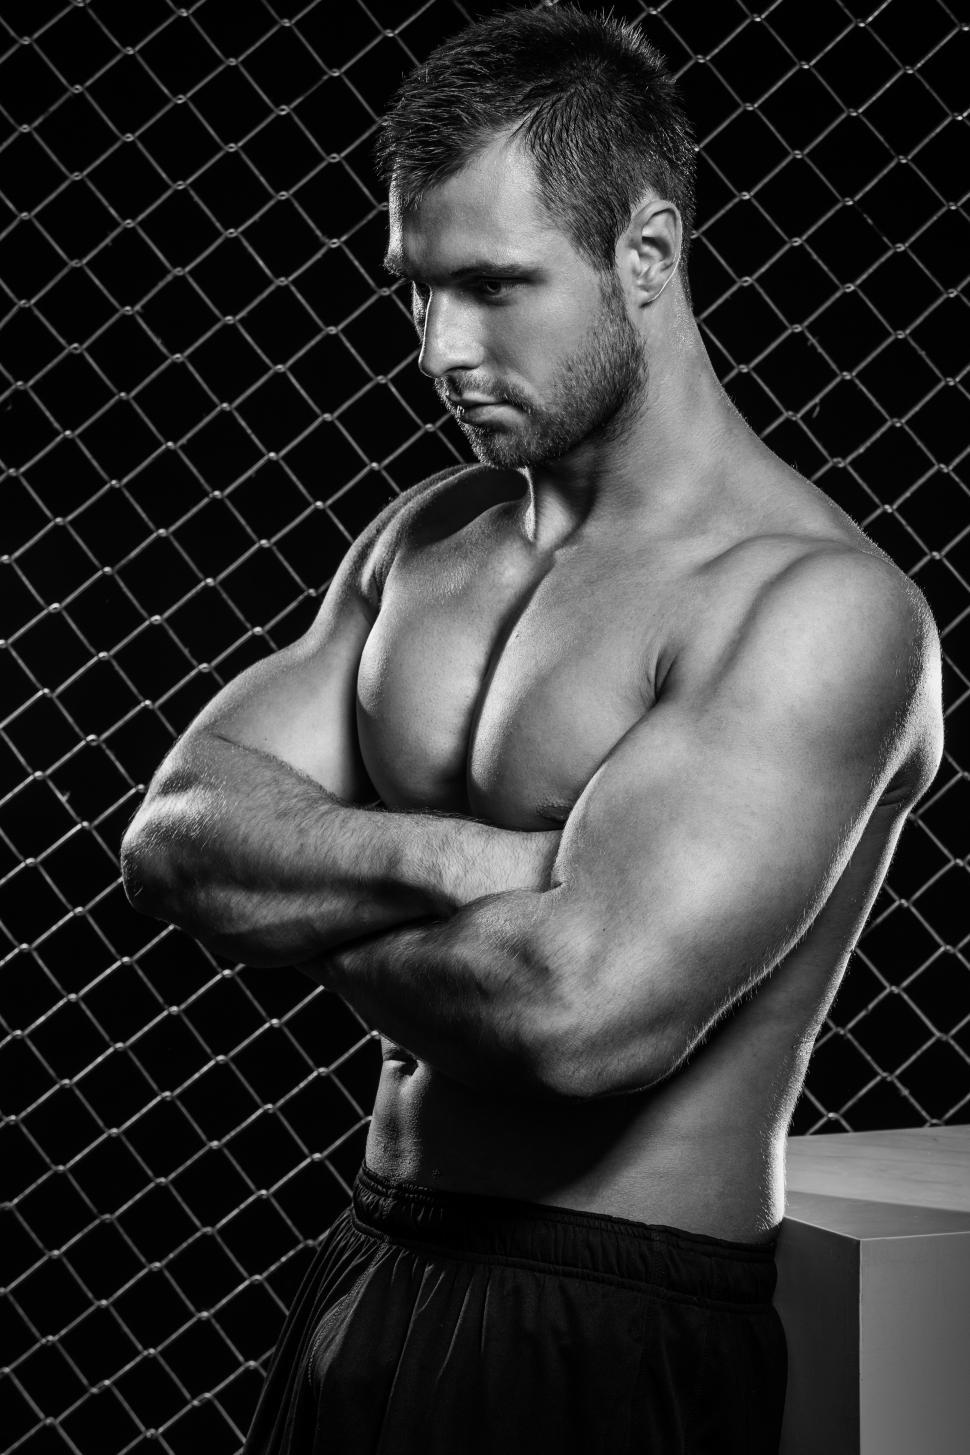 Free Image of Fitness. Shirtless muscular man standing with arms crossed. Black and white. 